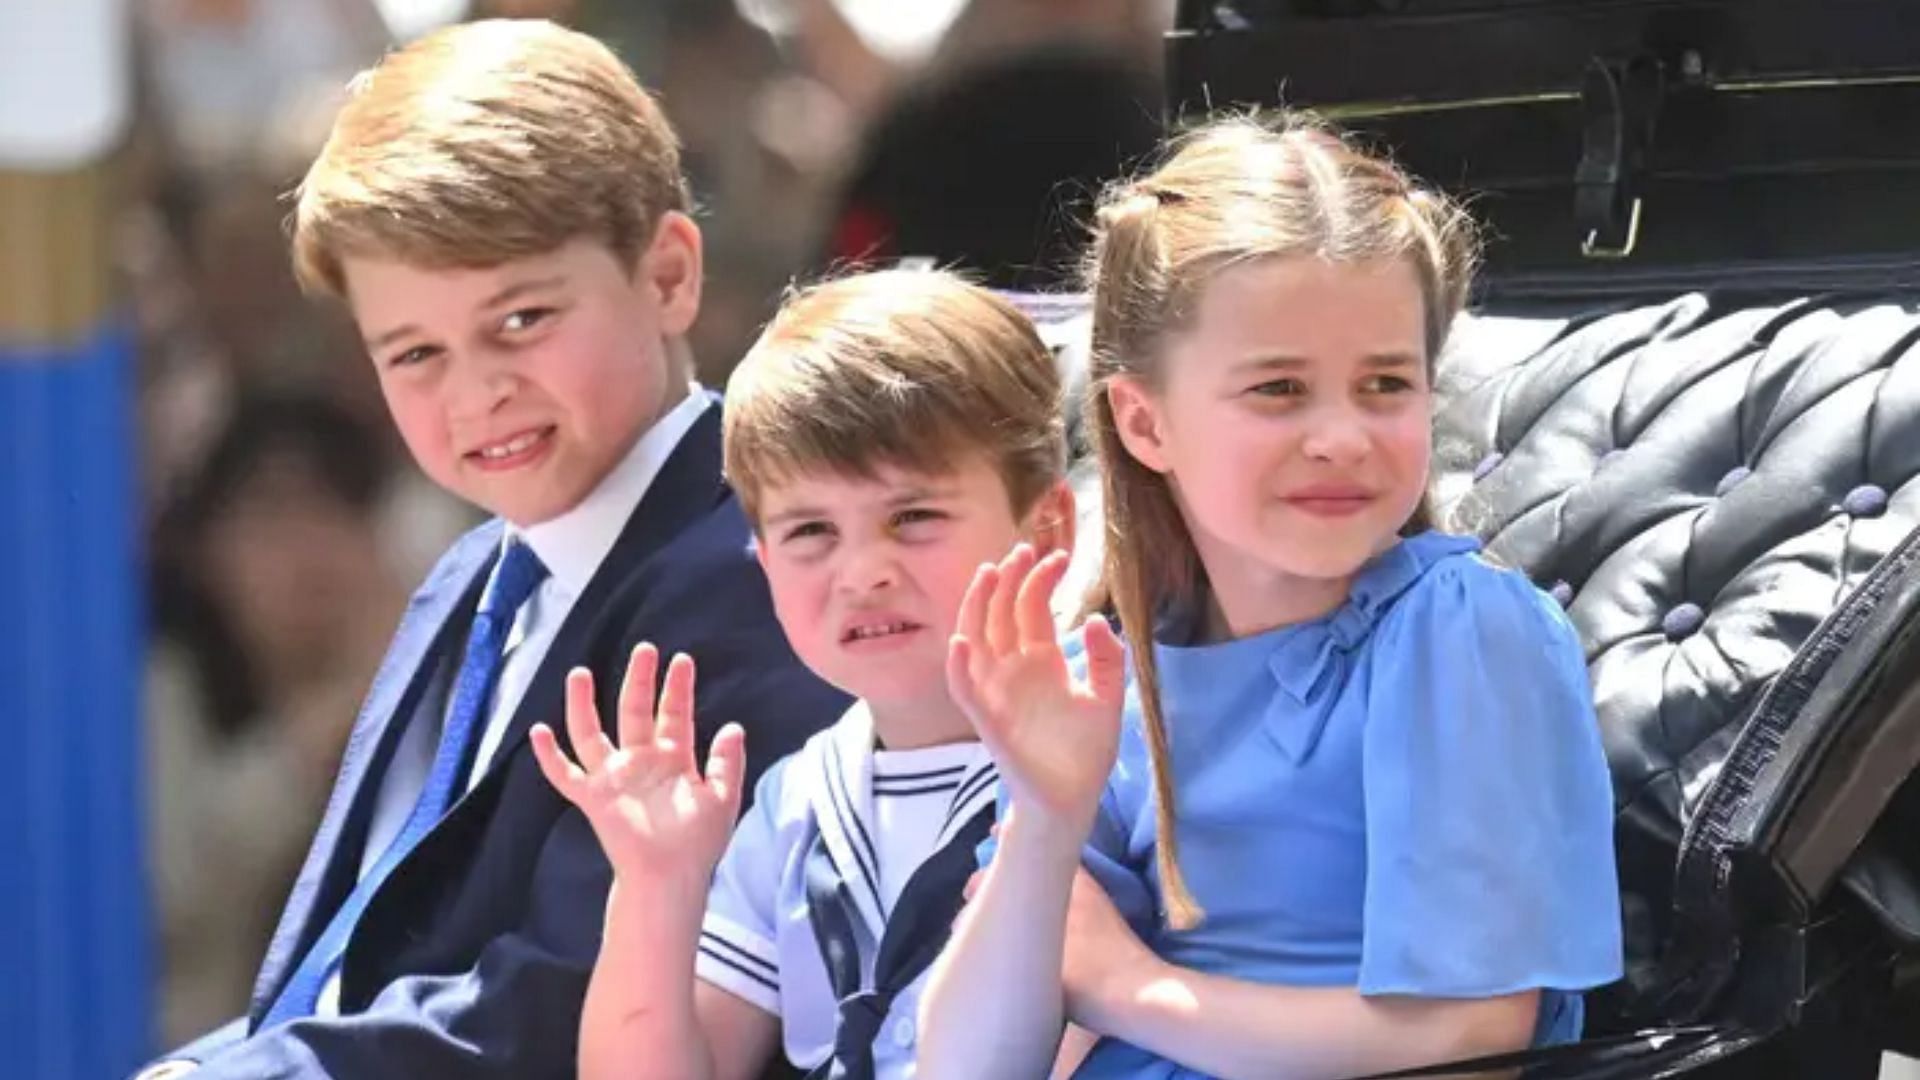 Where is Prince Princess Charlotte and Prince Louis' new school